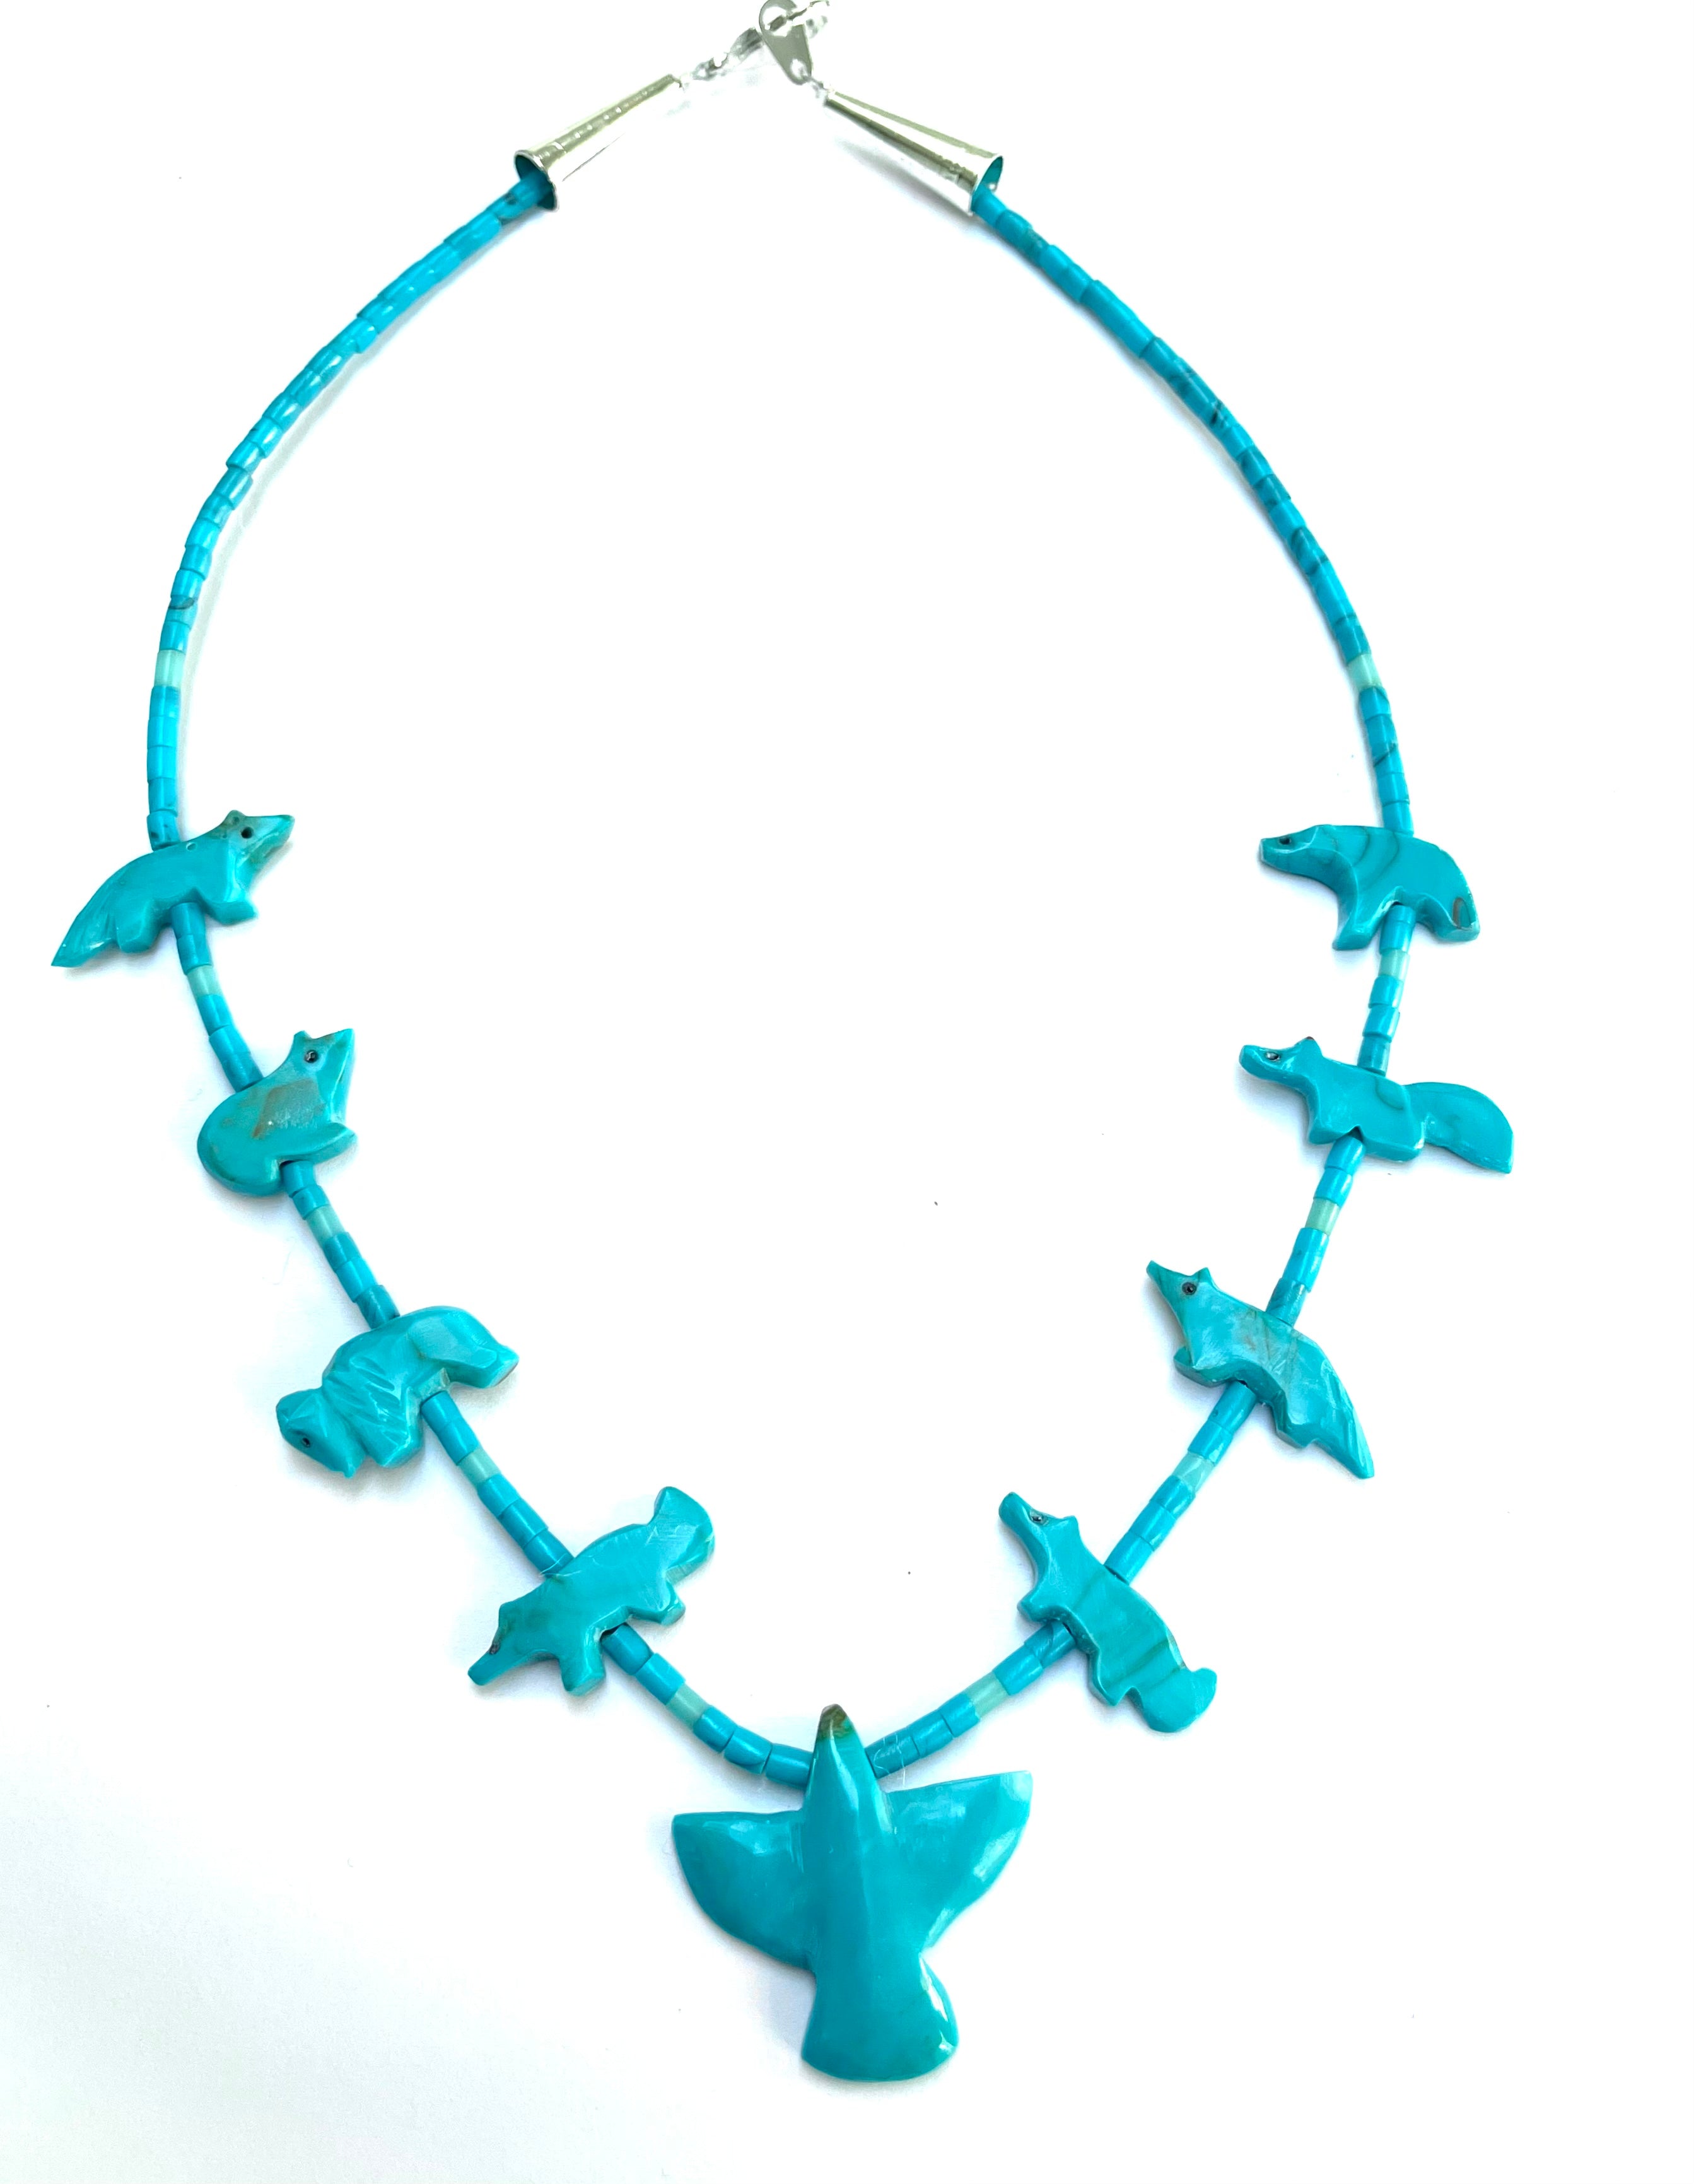 New mid size power animal necklace short